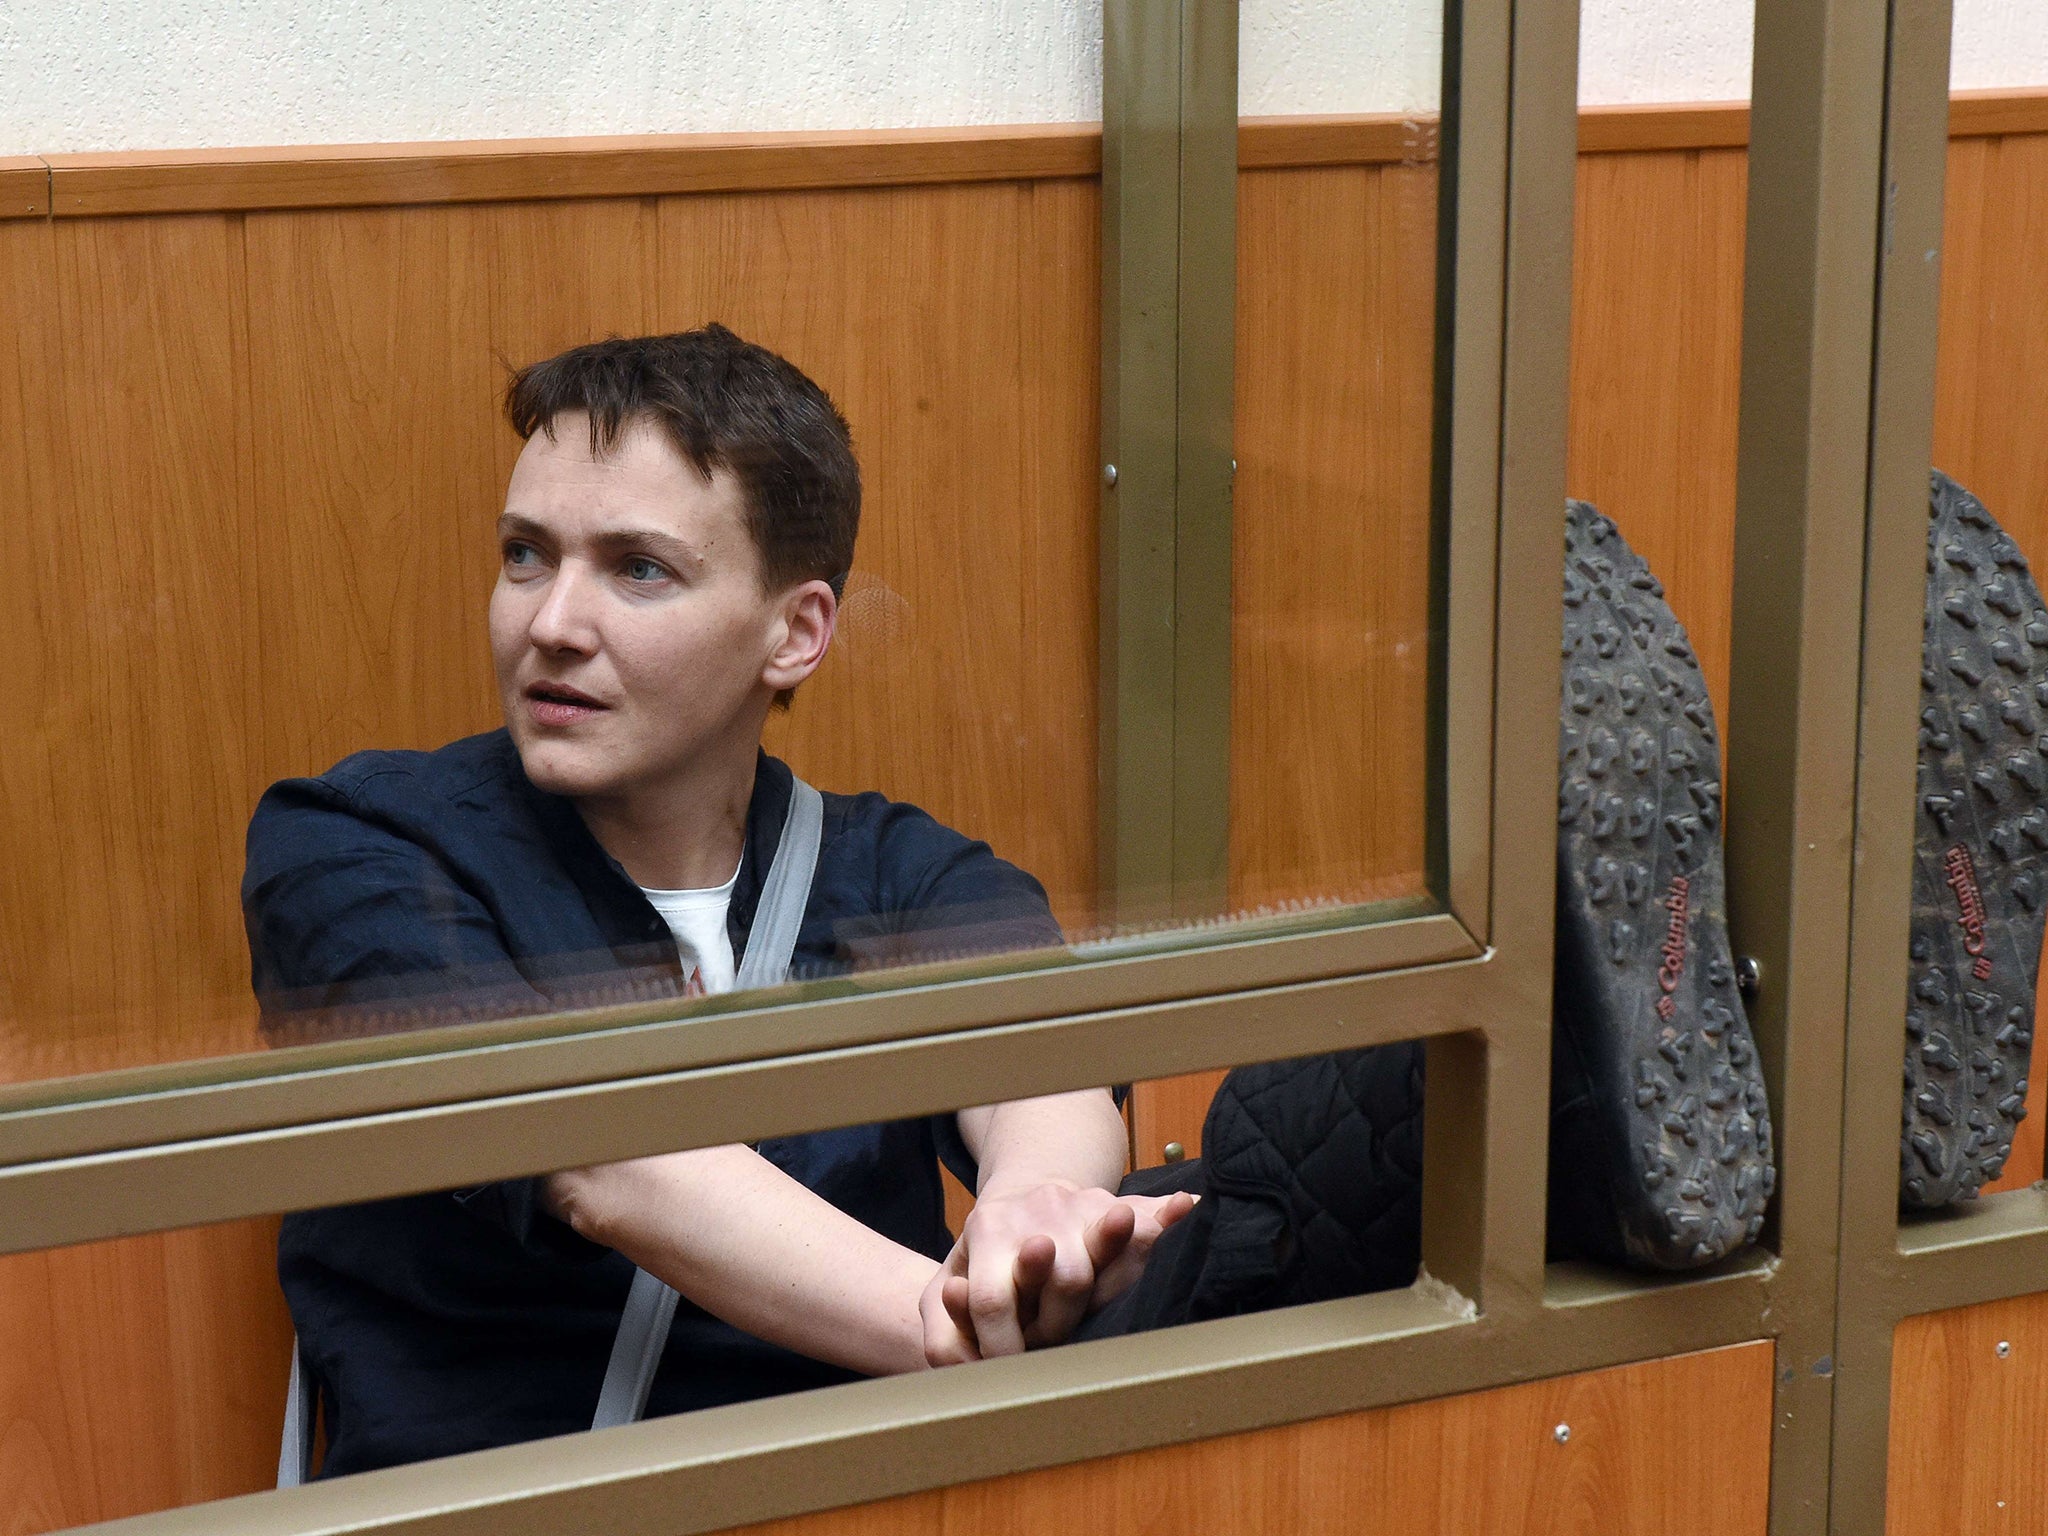 Ukrainian military pilot Nadiya Savchenko sits inside a defendant's cage during her sentencing hearing at a court in the southern Russian town of Donetsk